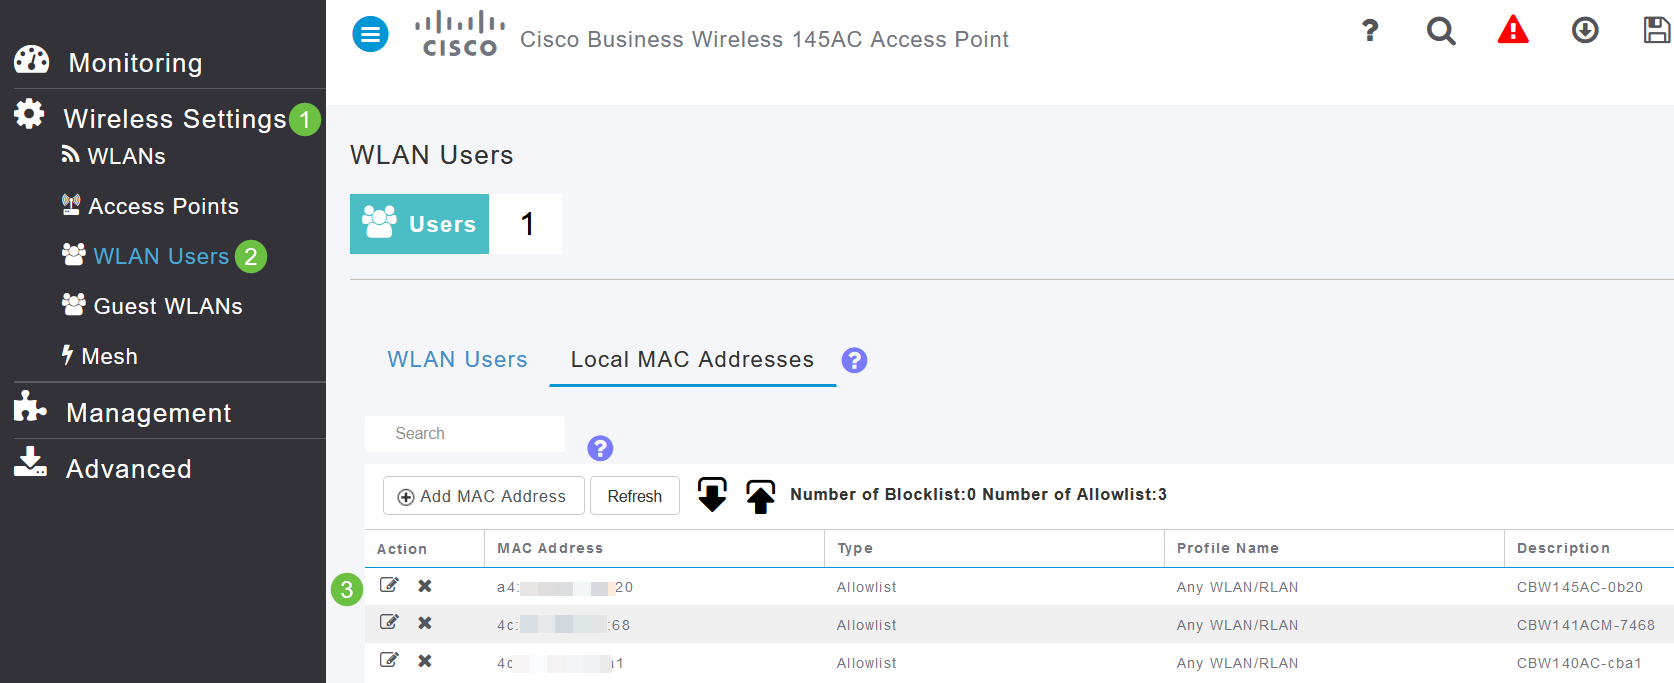 You can label each MAC address one of two ways: 1. Whitelisted – The device receives automatic access. 2. Blacklisted – The device will be denied access. 